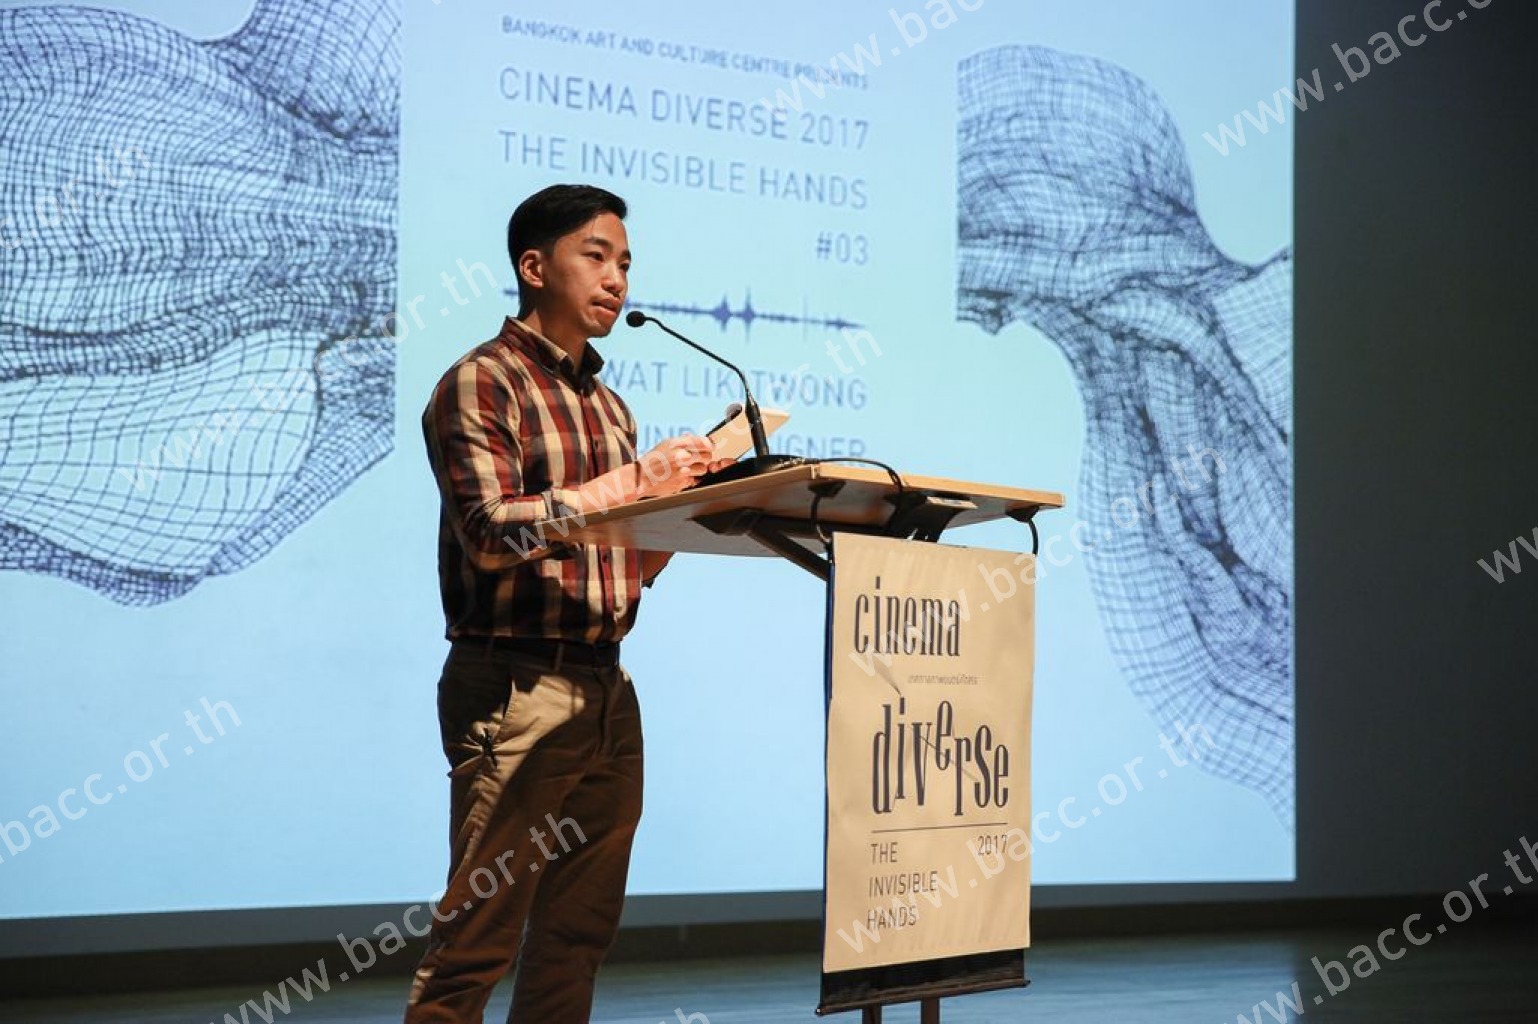 CINEMA DIVERSE 2017: The Invisible Hands 03 NOPAWAT LIKITWONG: THE SOUND DESIGNER